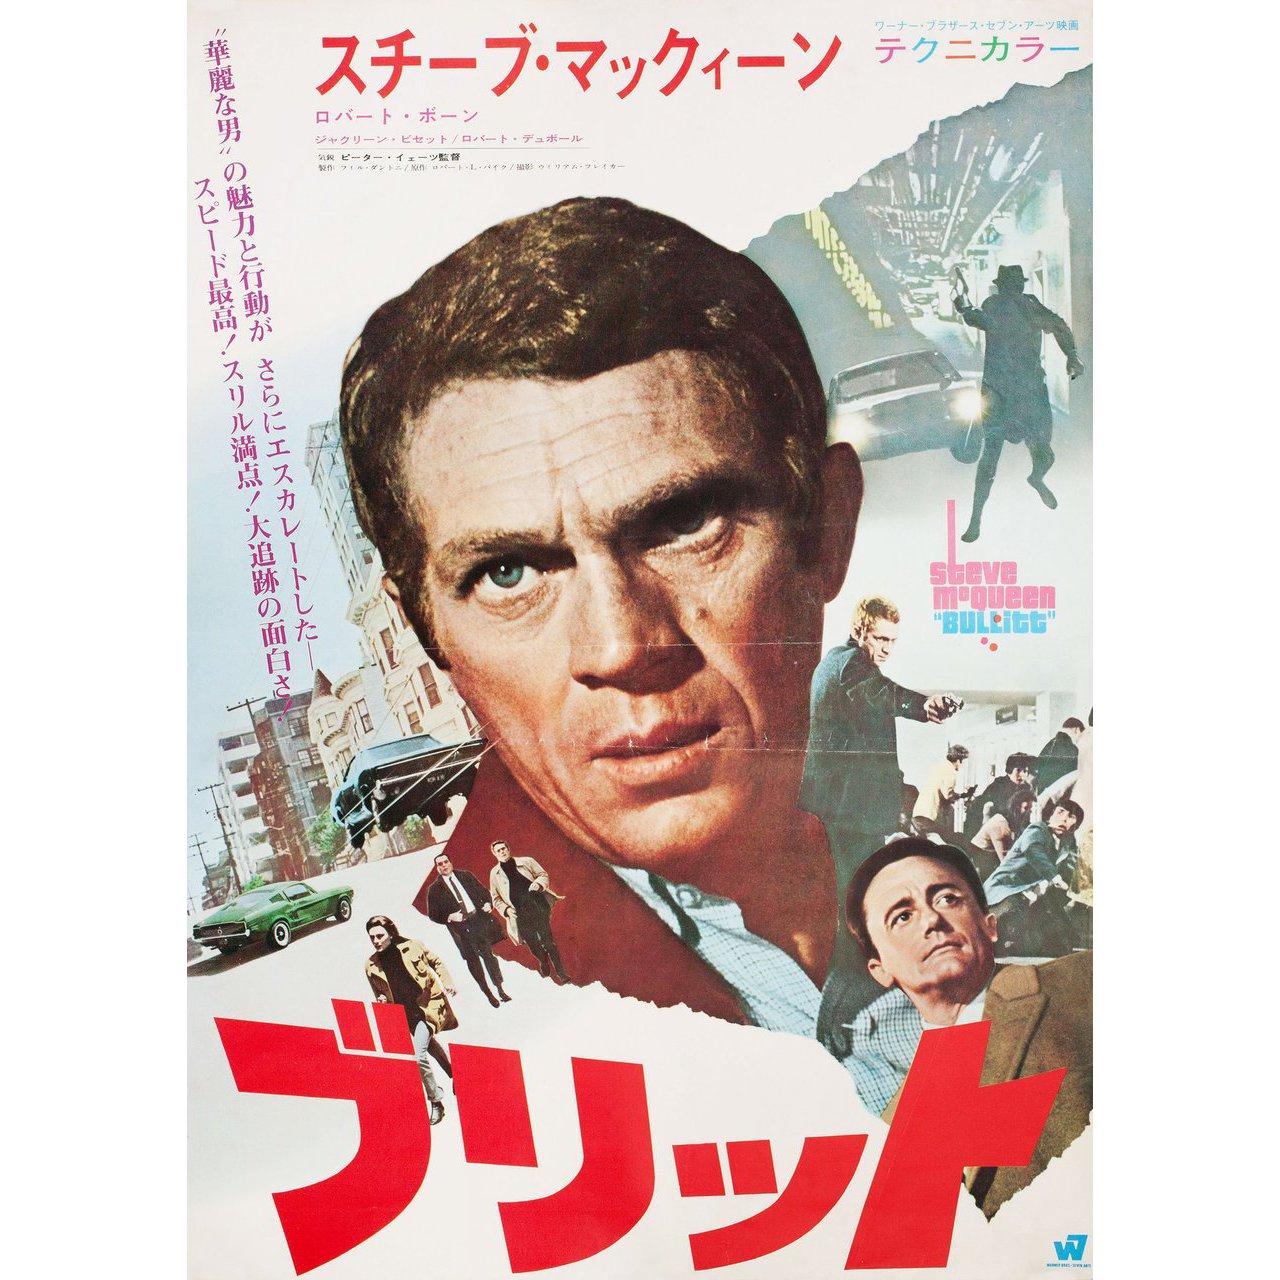 Original 1968 Japanese B5 chirashi flyer for the film Bullitt directed by Peter Yates with Steve McQueen / Jacqueline Bisset / Robert Vaughn / Don Gordon. Fine condition, rolled. Please note: the size is stated in inches and the actual size can vary